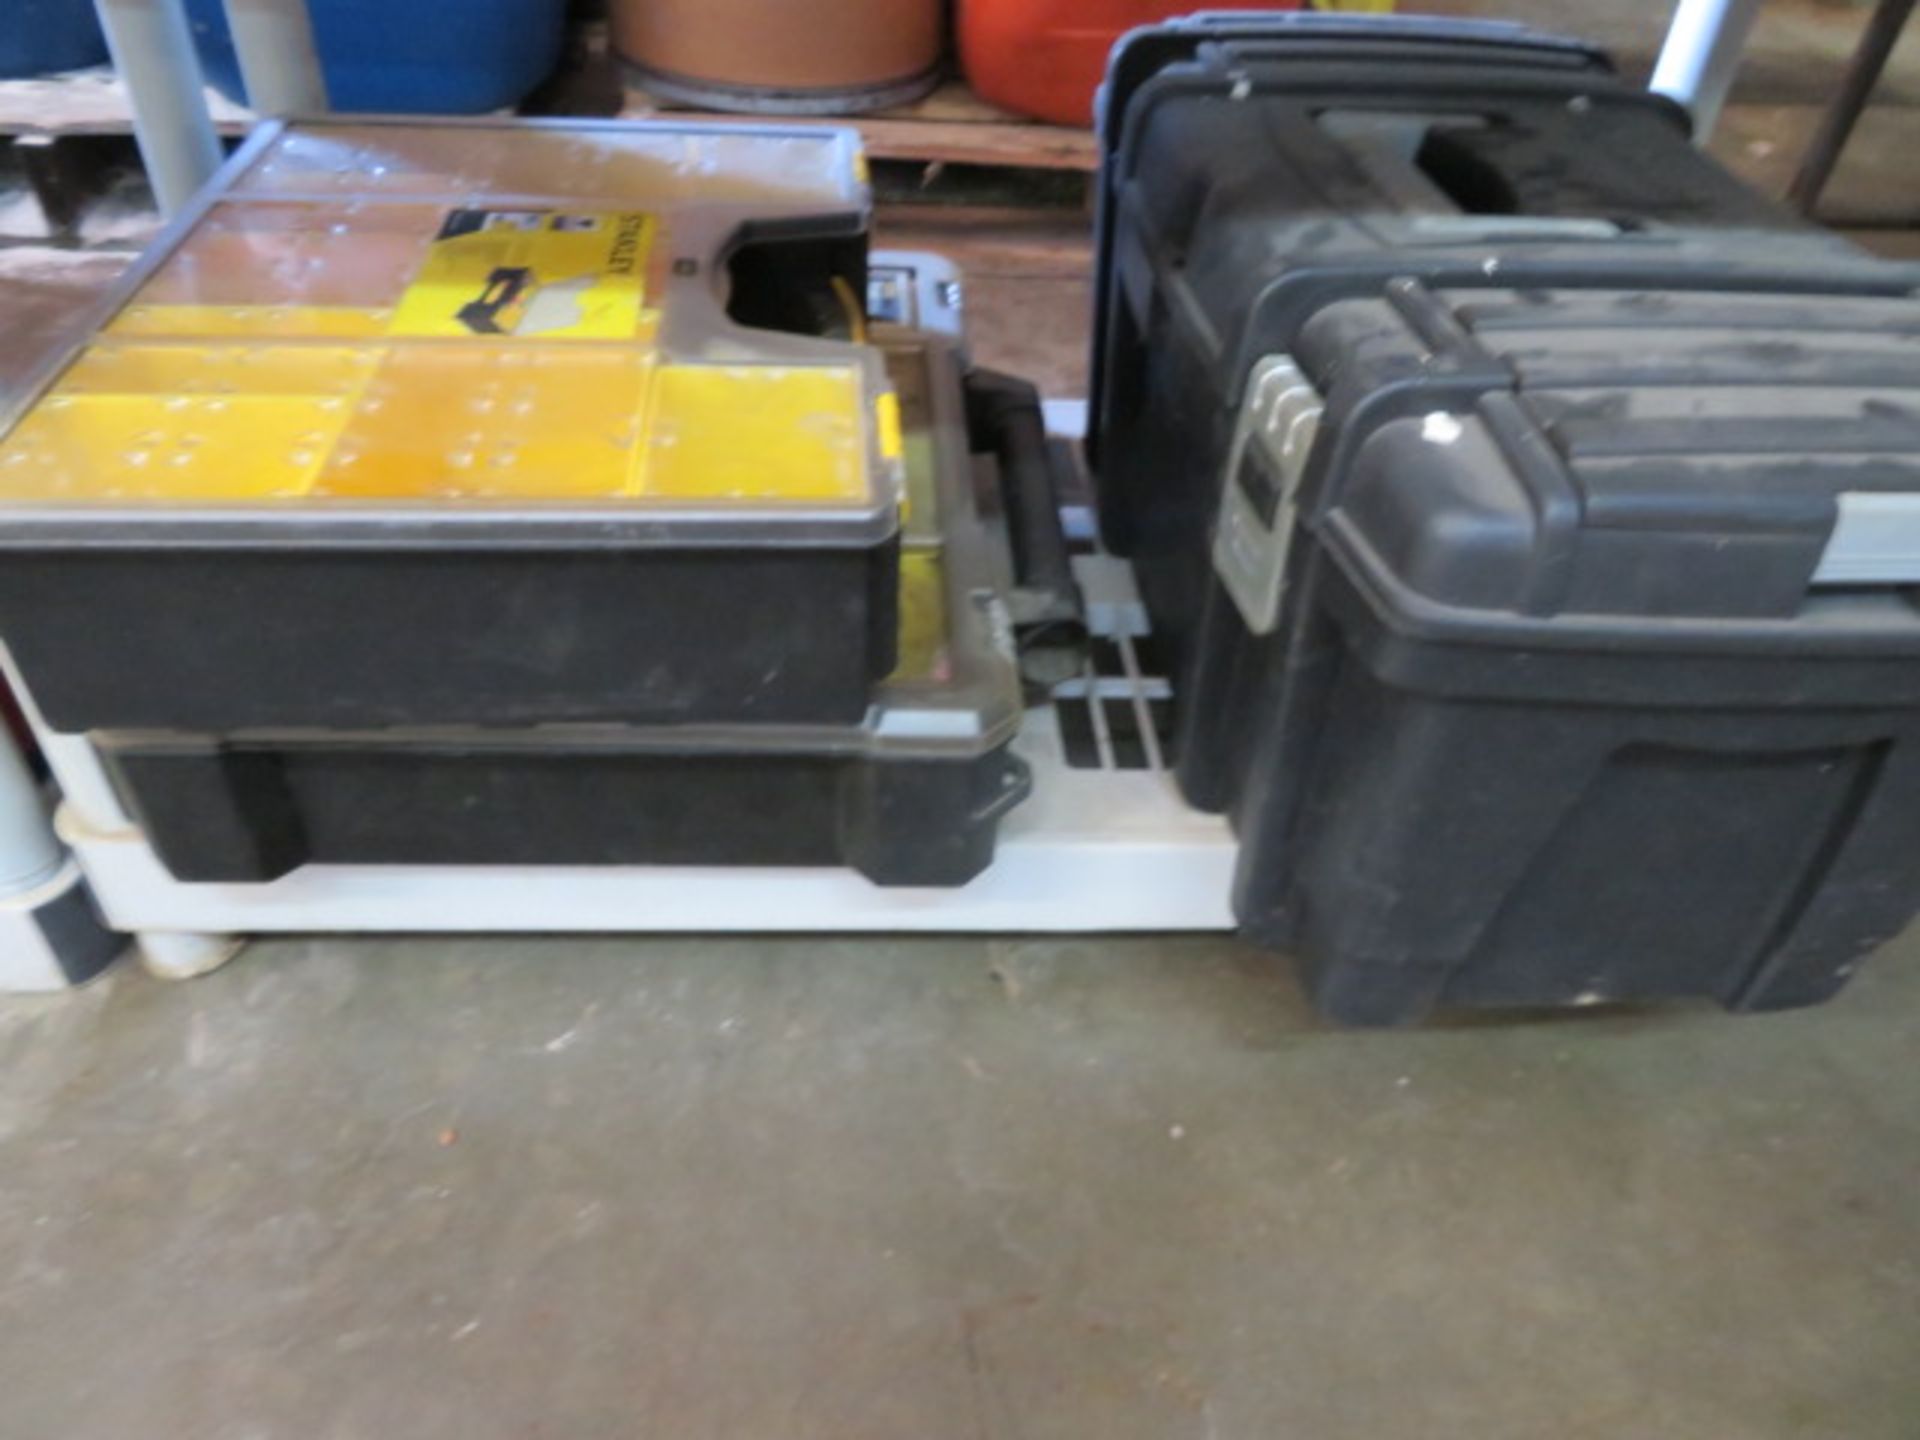 LOT CONSISTING OF: empty tool boxes & parts containers, assorted (nine pieces) - Image 3 of 3